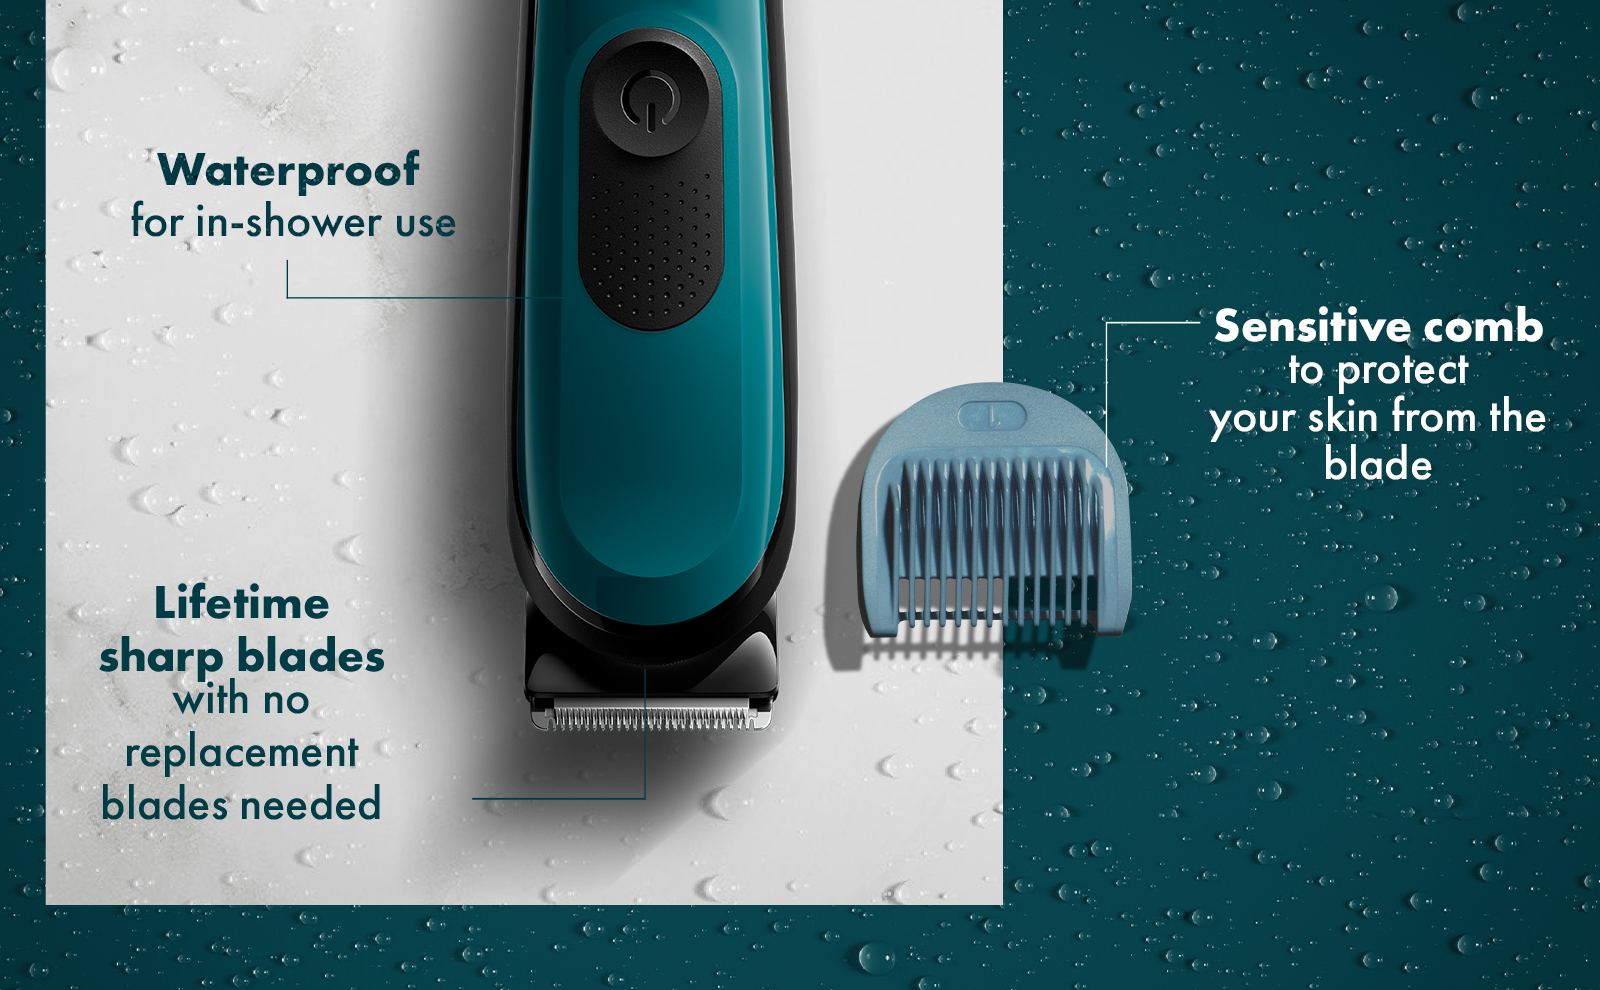 Waterproof for in-shower use. Lifetime sharp blades with no replacement blades needed. Sensitive comb to protect your skin from the blade.